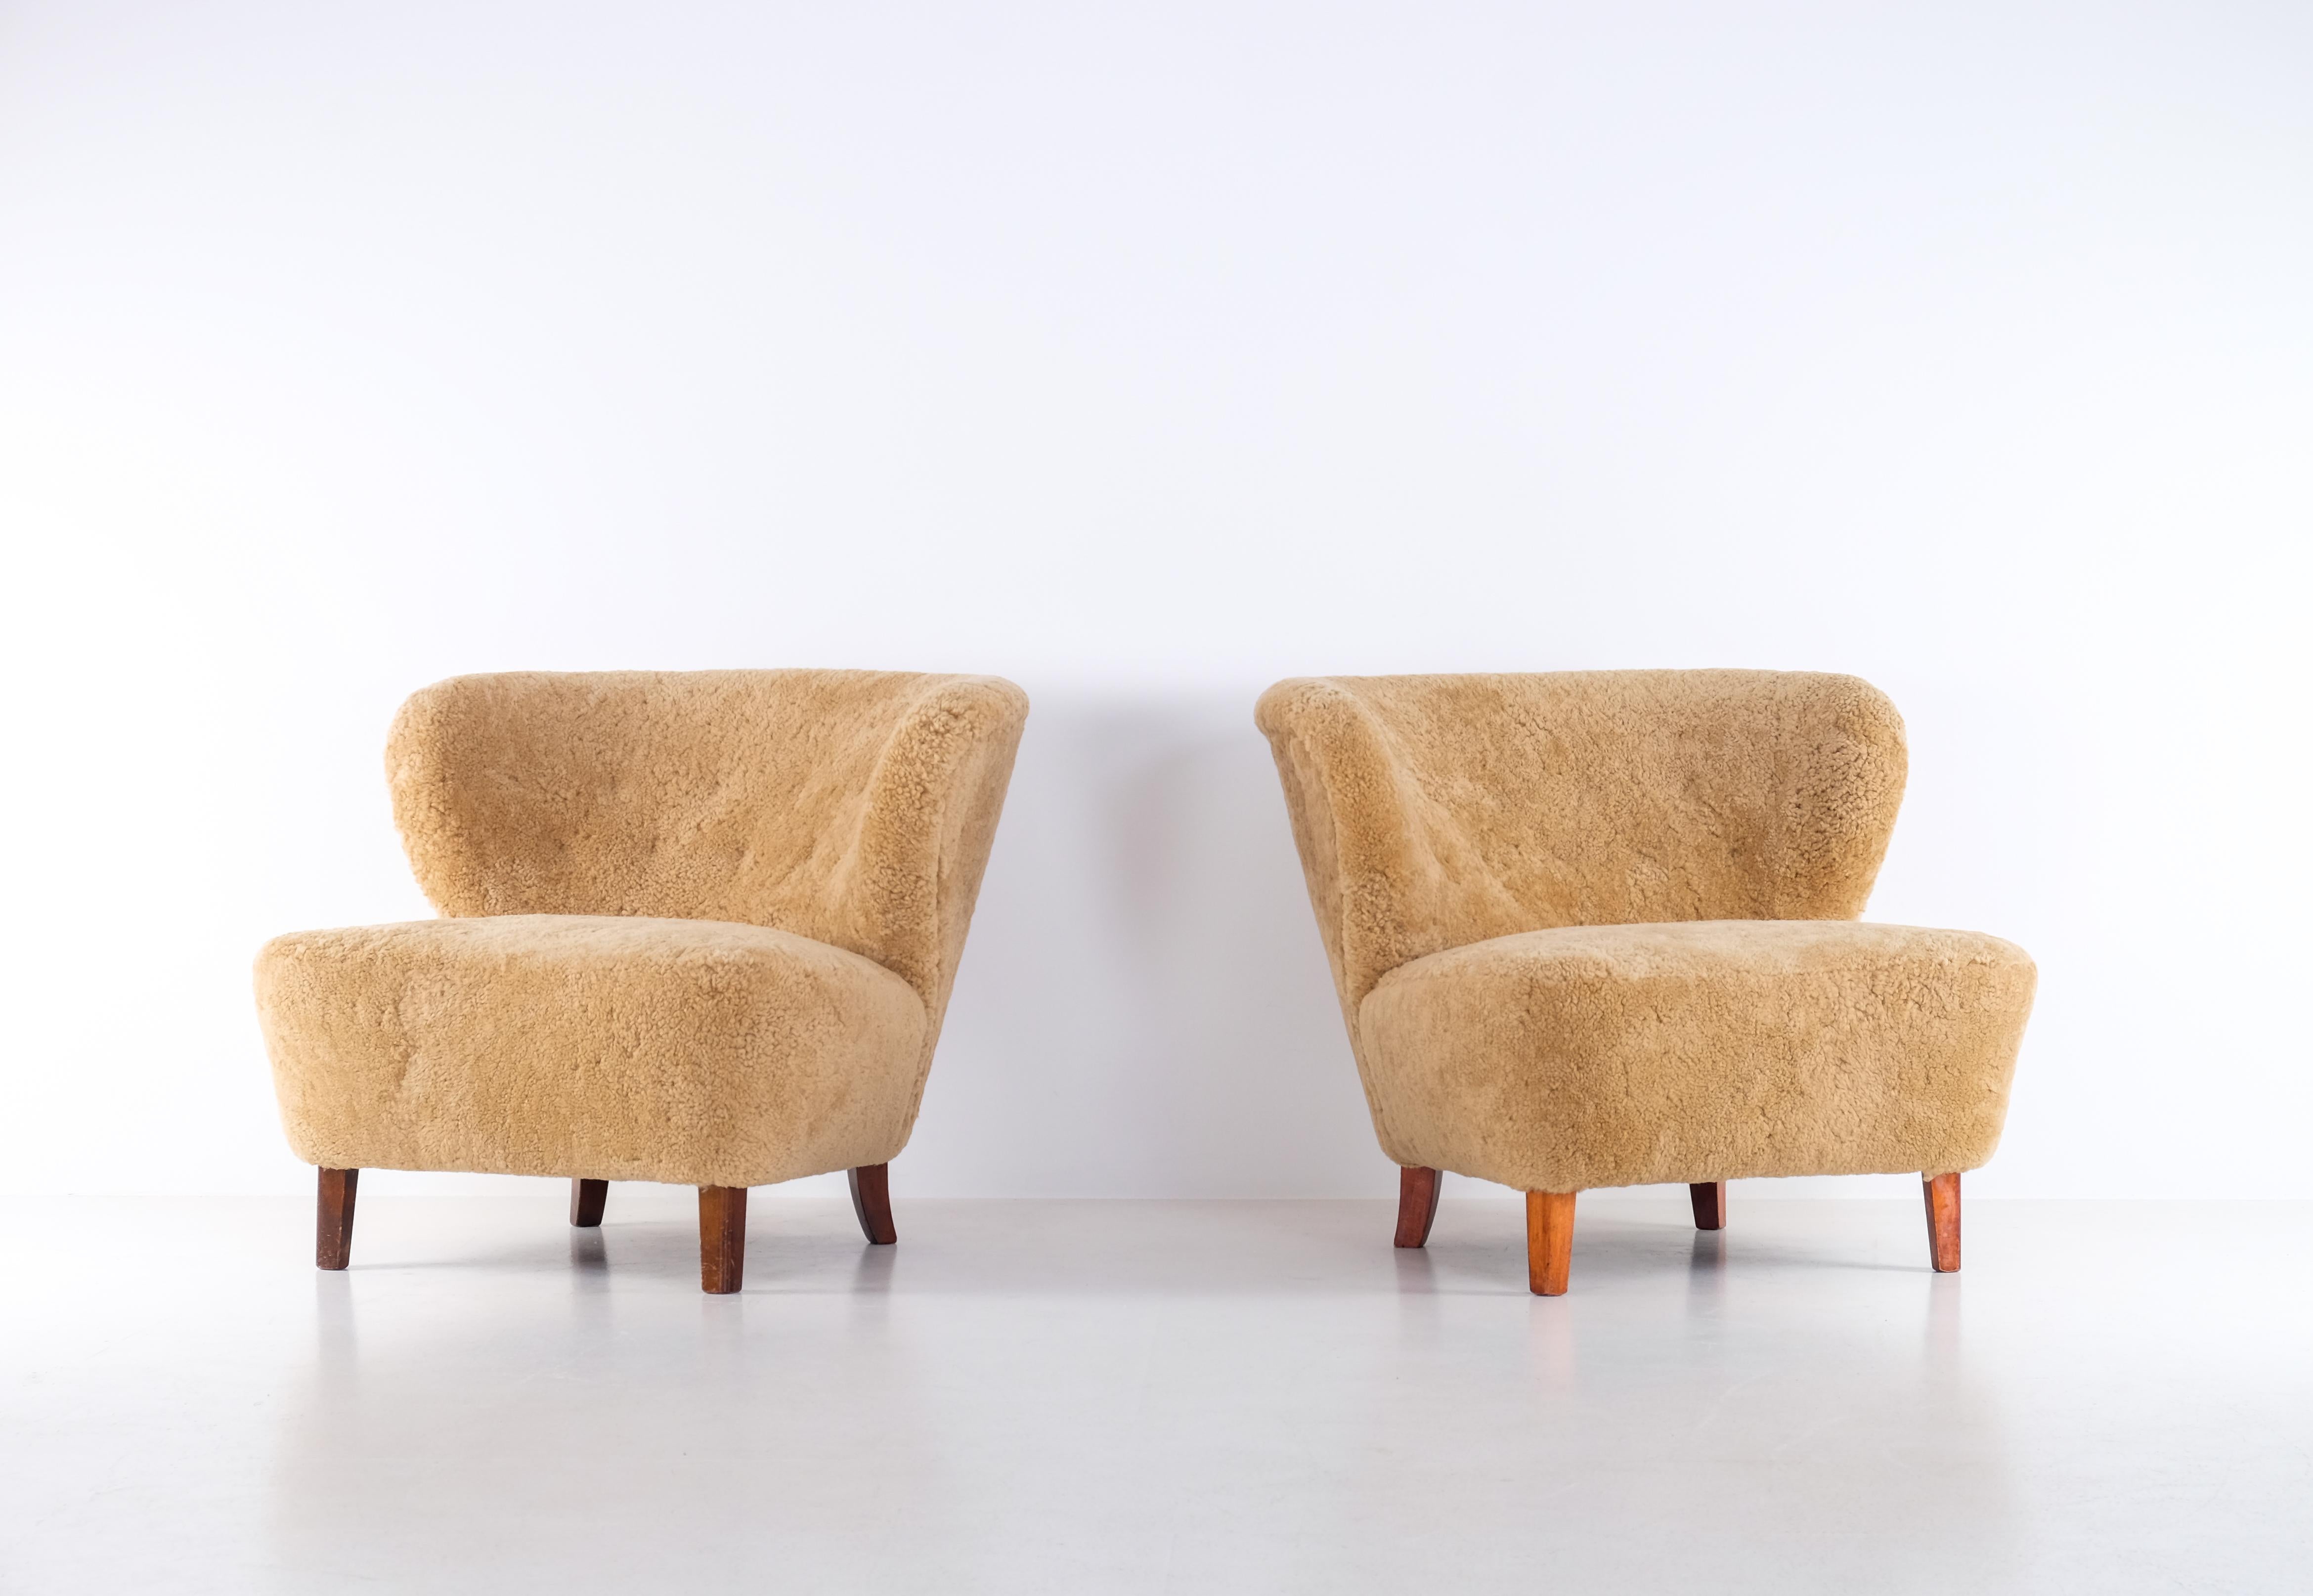 Pair of Easy Chairs by AB Erik Ek's Snickerifabrik, Malmö, Sweden, 1940s For Sale 1